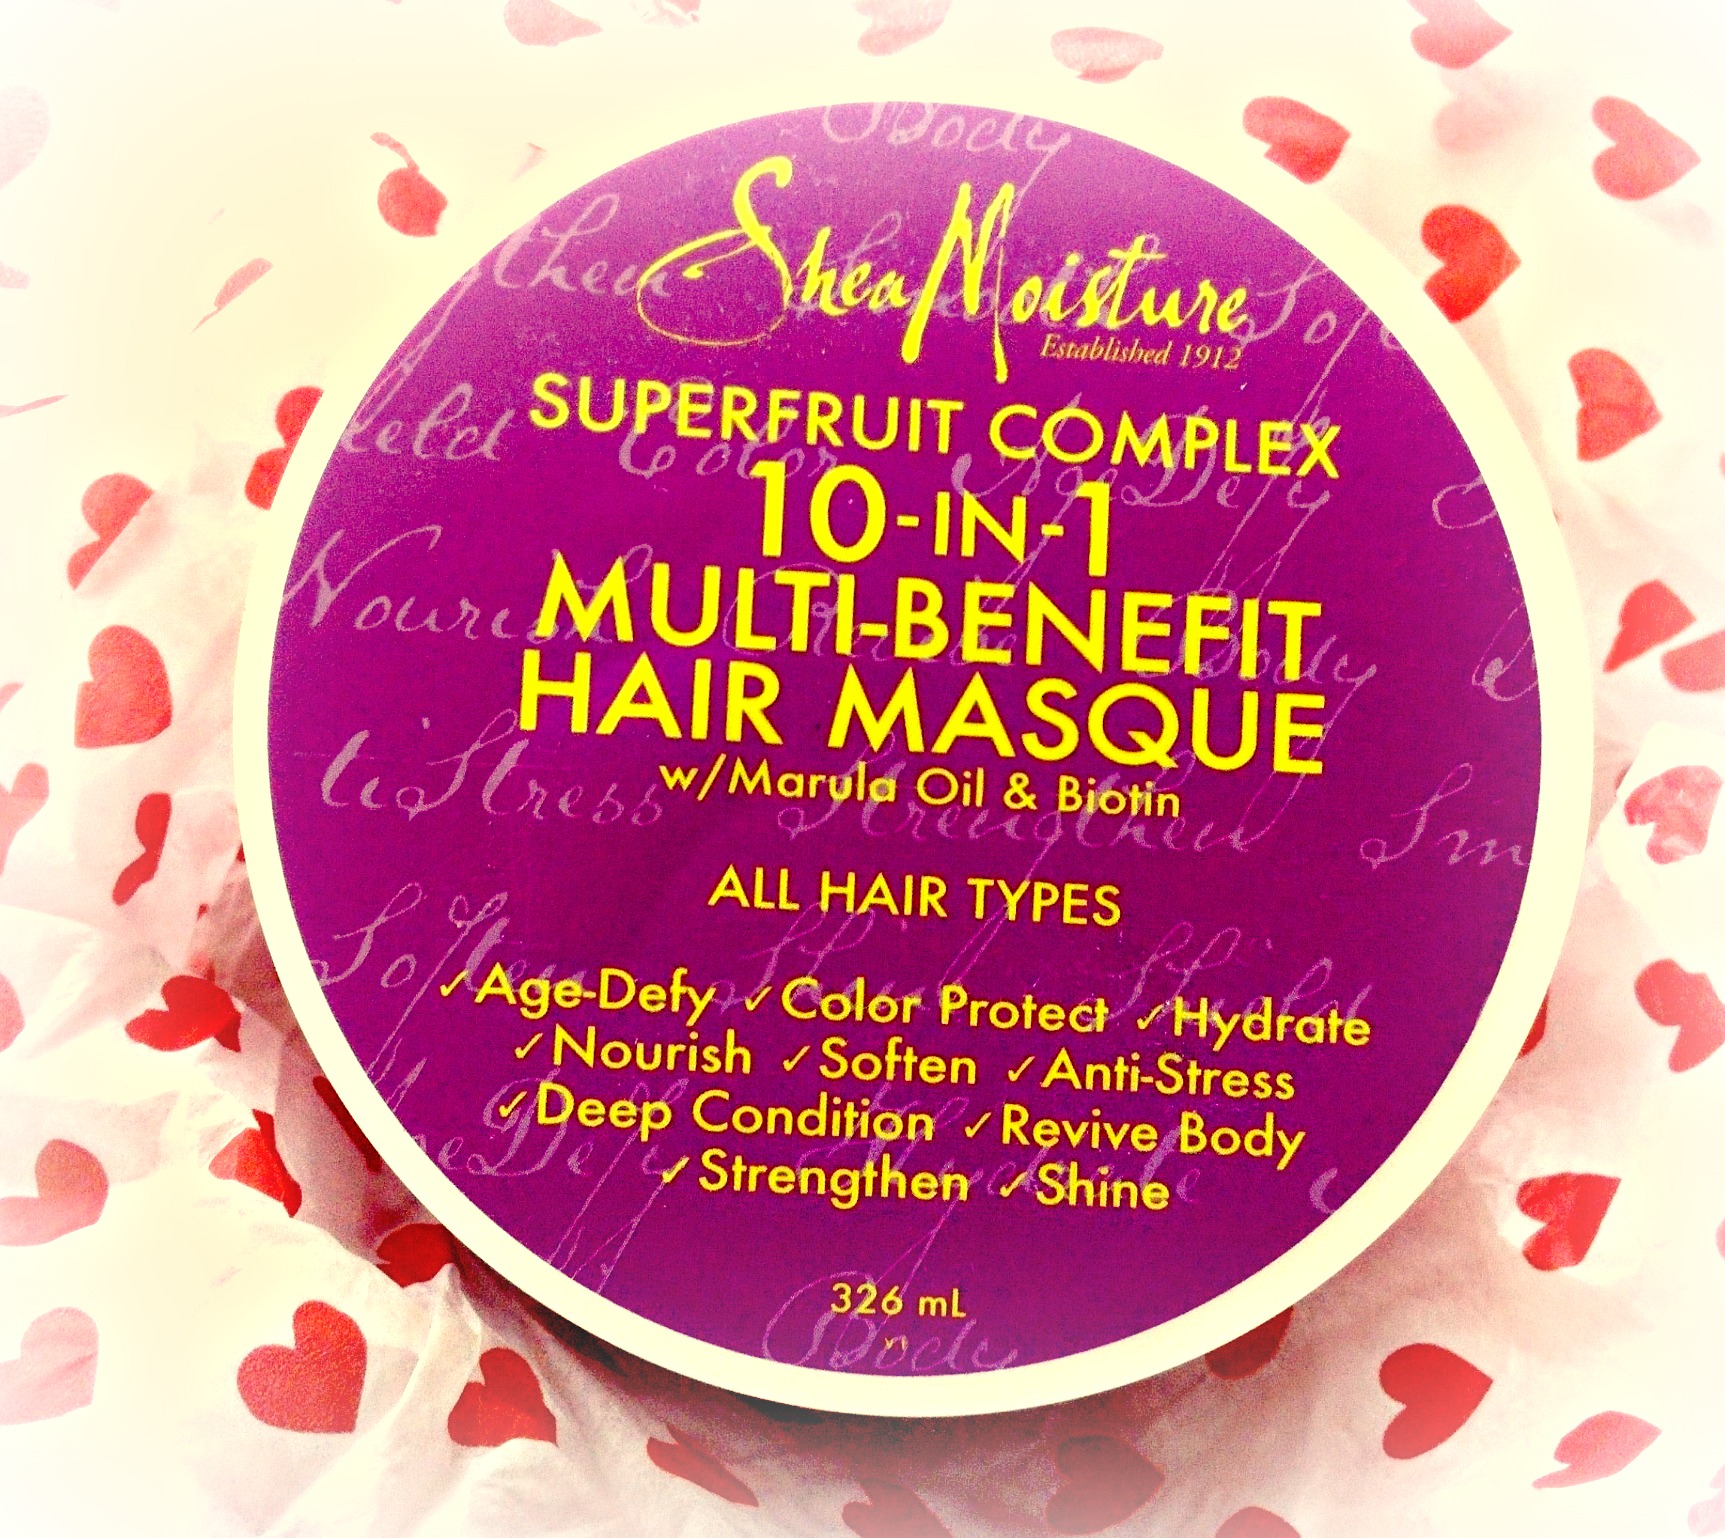 Shea Moisture Superfruit Complex 10-in-1 Multi-Benefit Hair Masque with Marula Oil and Biotin